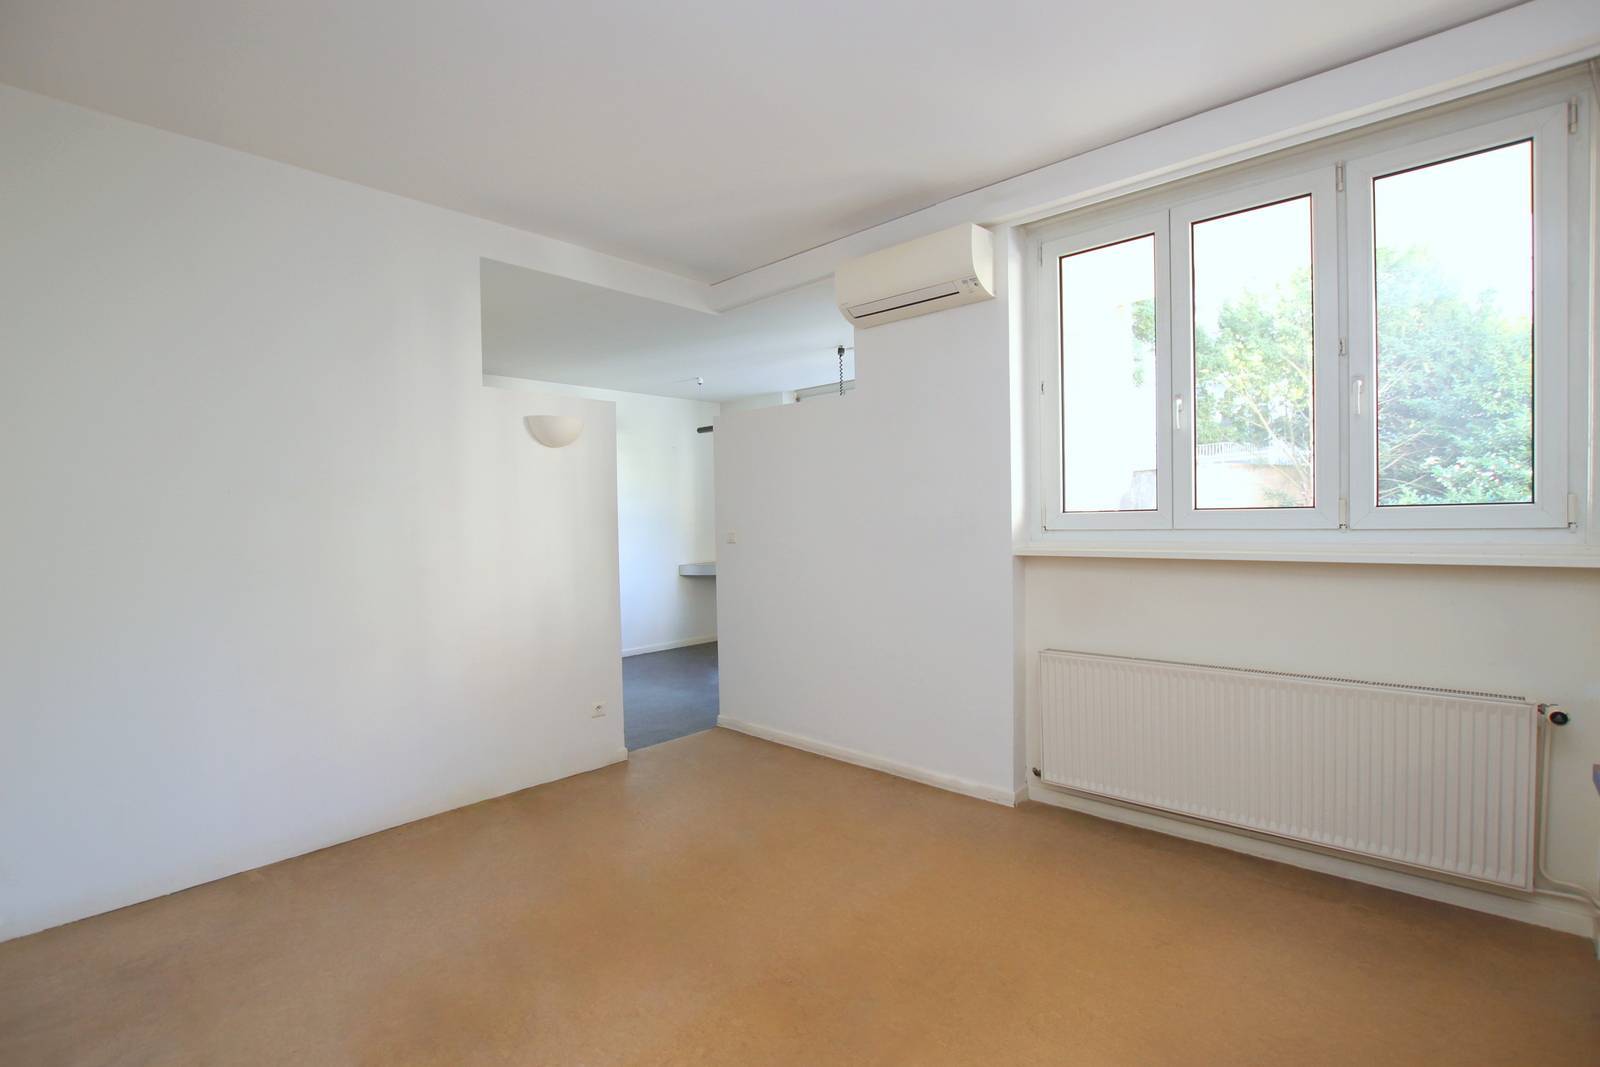 RARE – STRASBOURG - ORANGERIE PROX INSTITUTIONS EUROPEENNES – PLATEAU A AMENAGER CLIMATISE 117 m² - POSS. DE CREER DBLE SEJOUR + 3 CHAMBRES - GARAGE